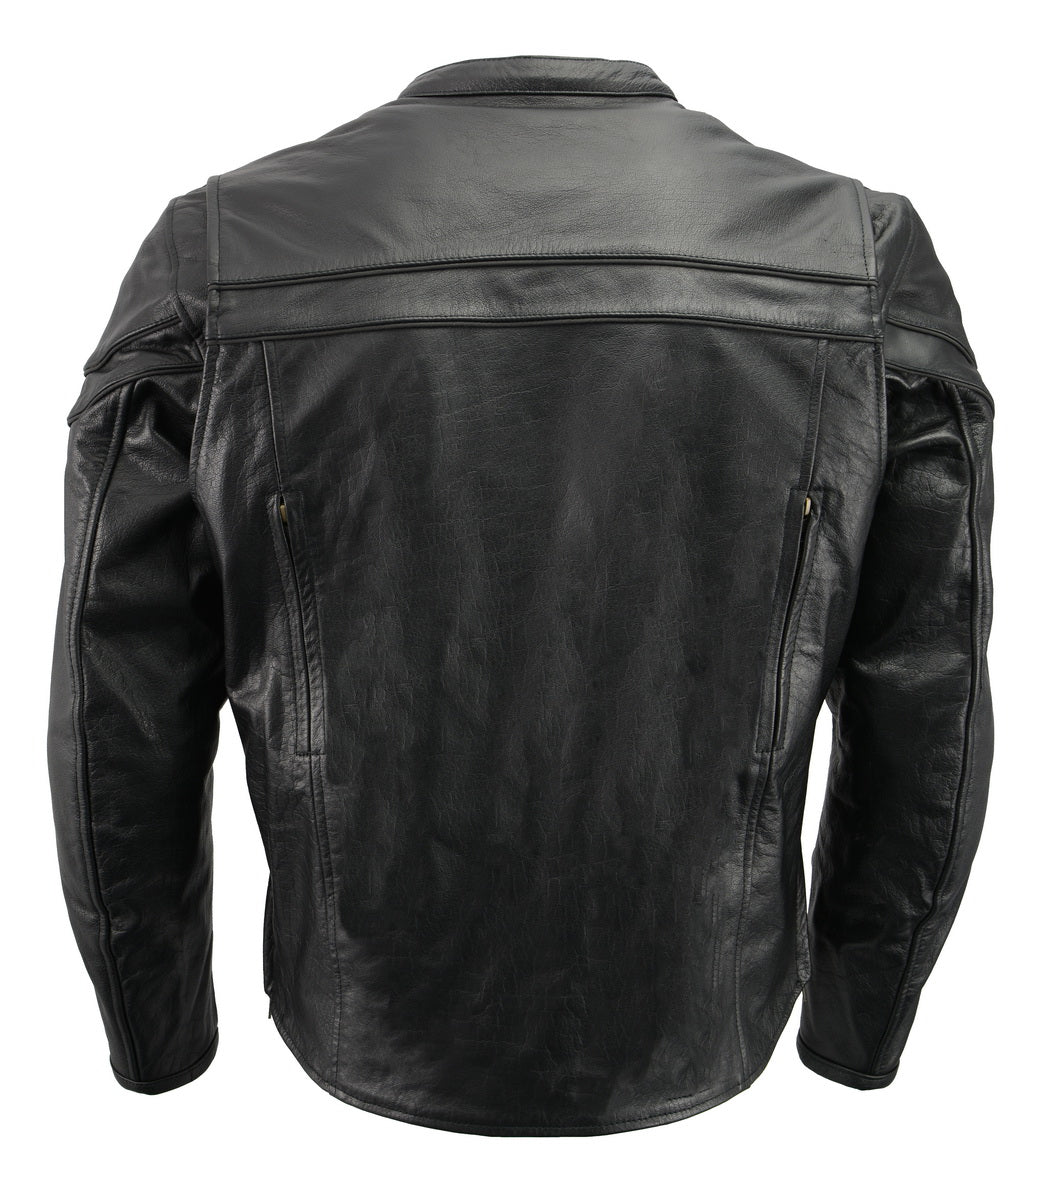 Men’s Premium Buffalo Black Leather Motorcycle Jacket with CE Armor Protection BZ1512